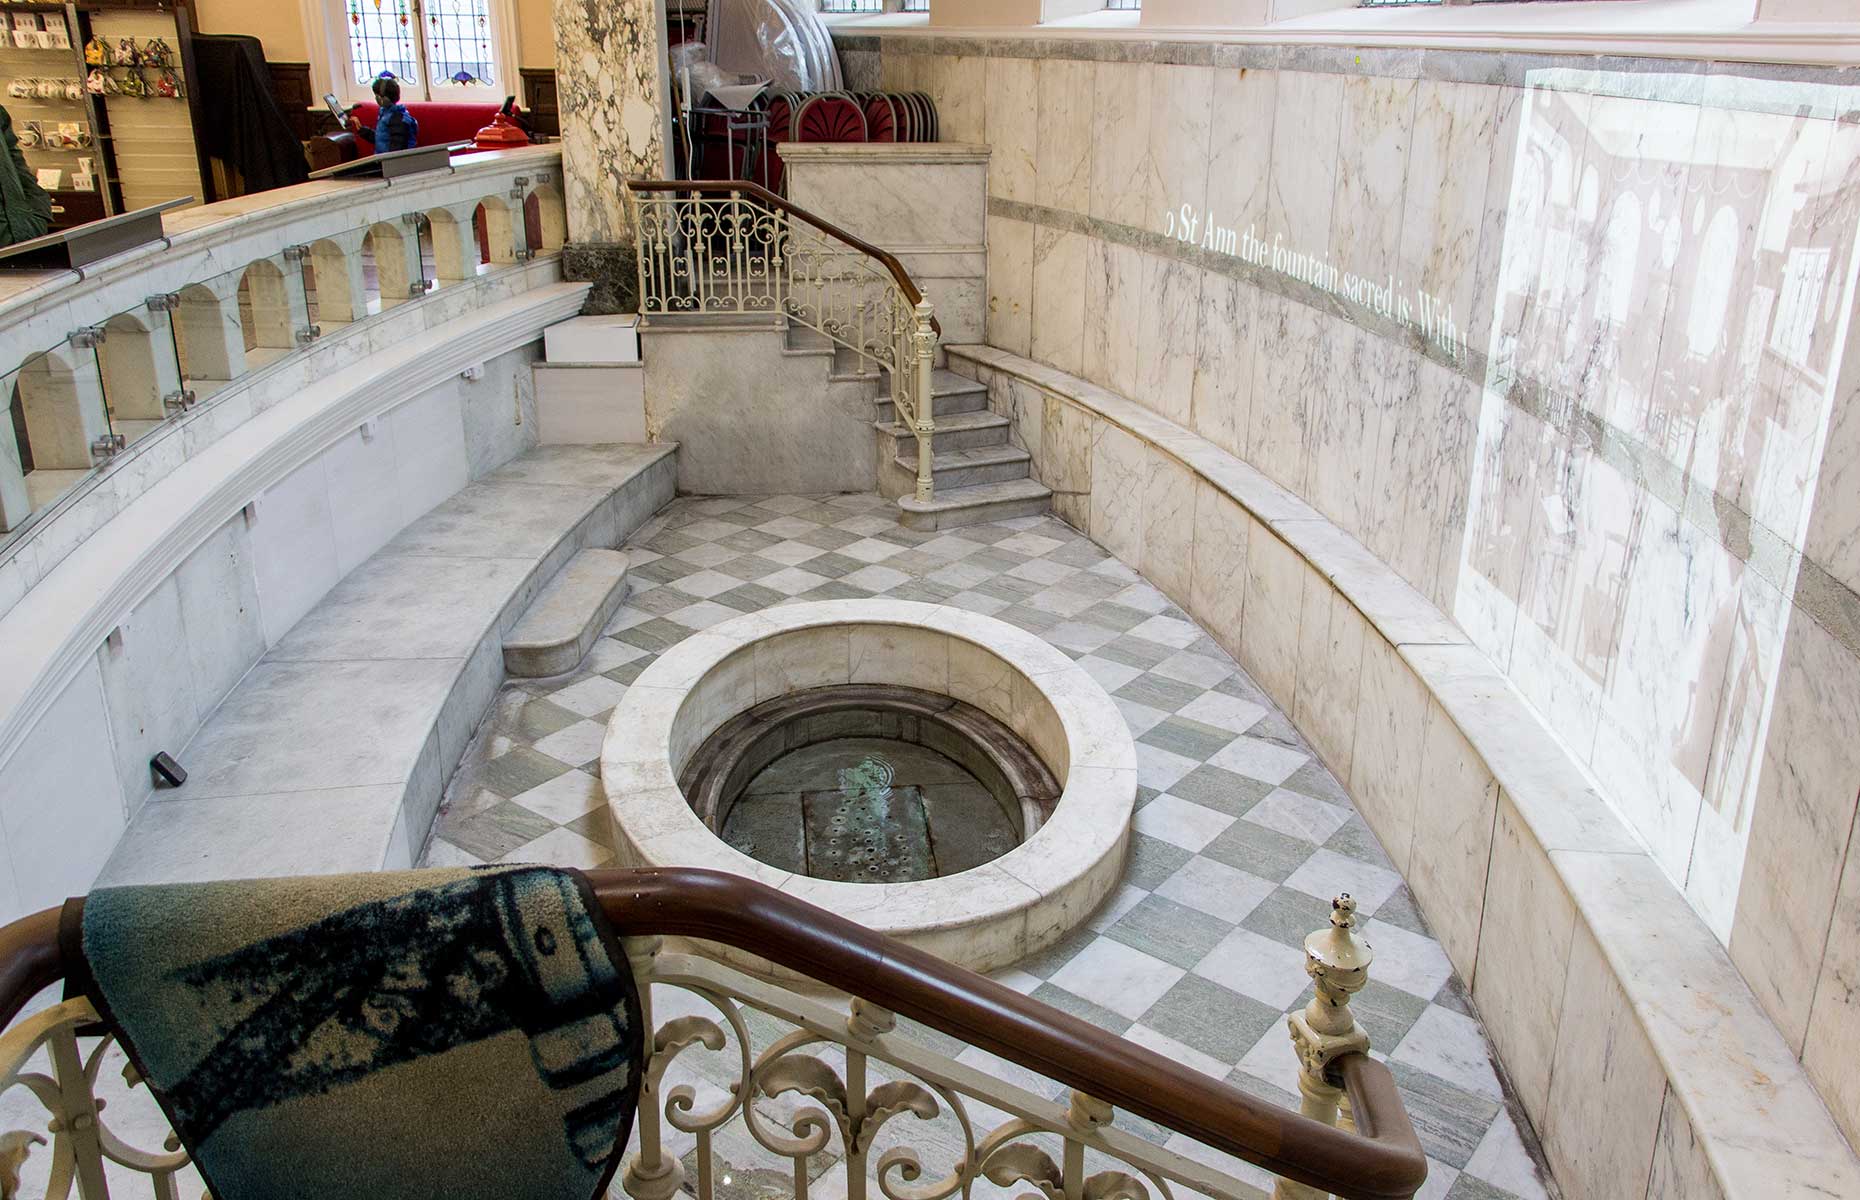 Buxton Pump Room (Image: Billy Wilson/Flickr/CC BY-NC 2.0 )